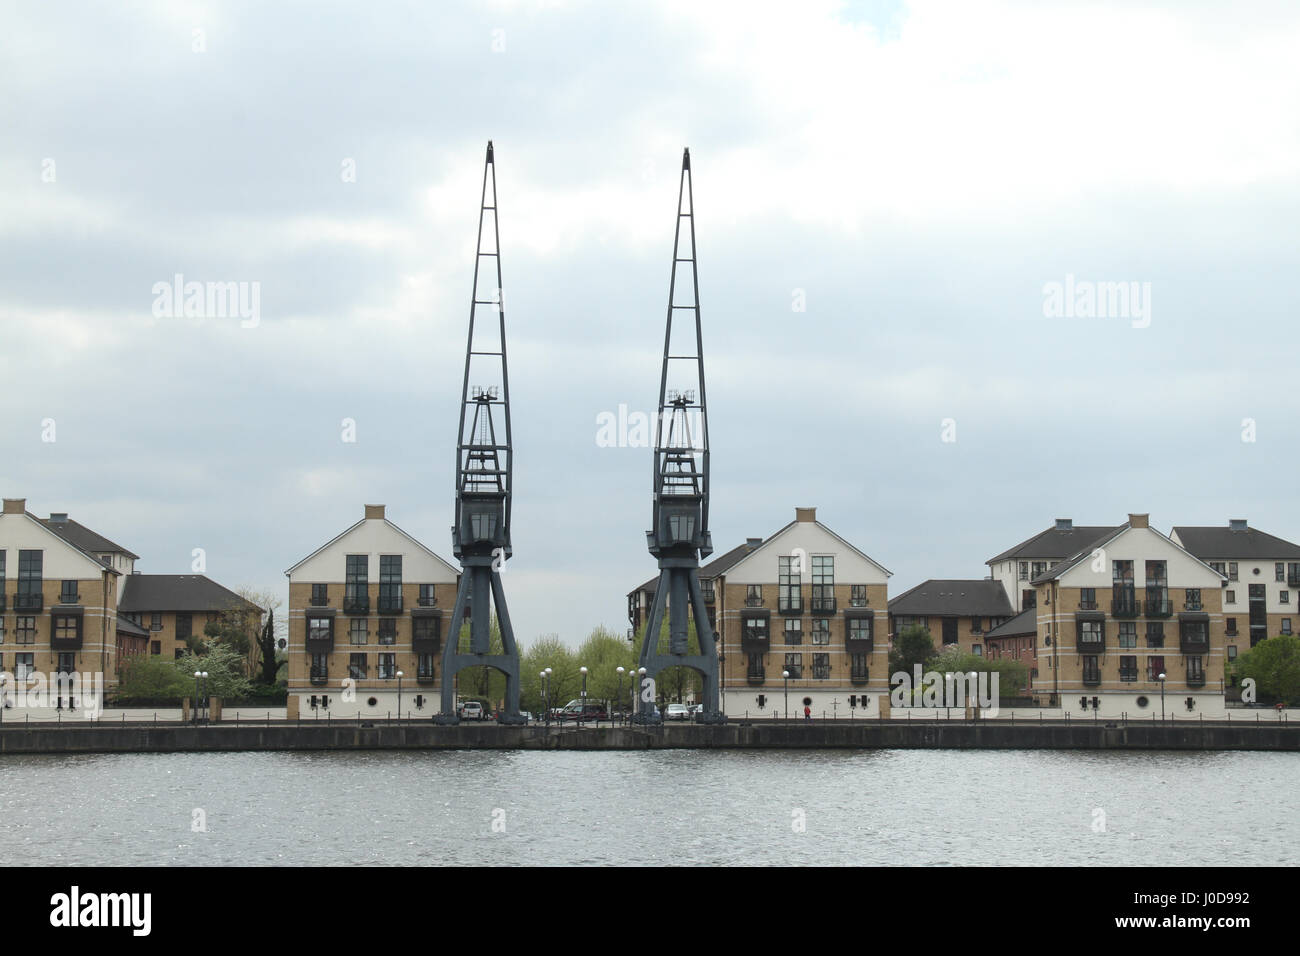 London, UK. 12th Apr, 2017. London, United Kingdom - April 12: Cranes and residential houses at the Royal Victoria in East London. The Royal Victoria Dock was the largest of three docks in the Royal Docks of east London, now part of the redeveloped Docklands. Credit: David Mbiyu/Alamy Live News Stock Photo